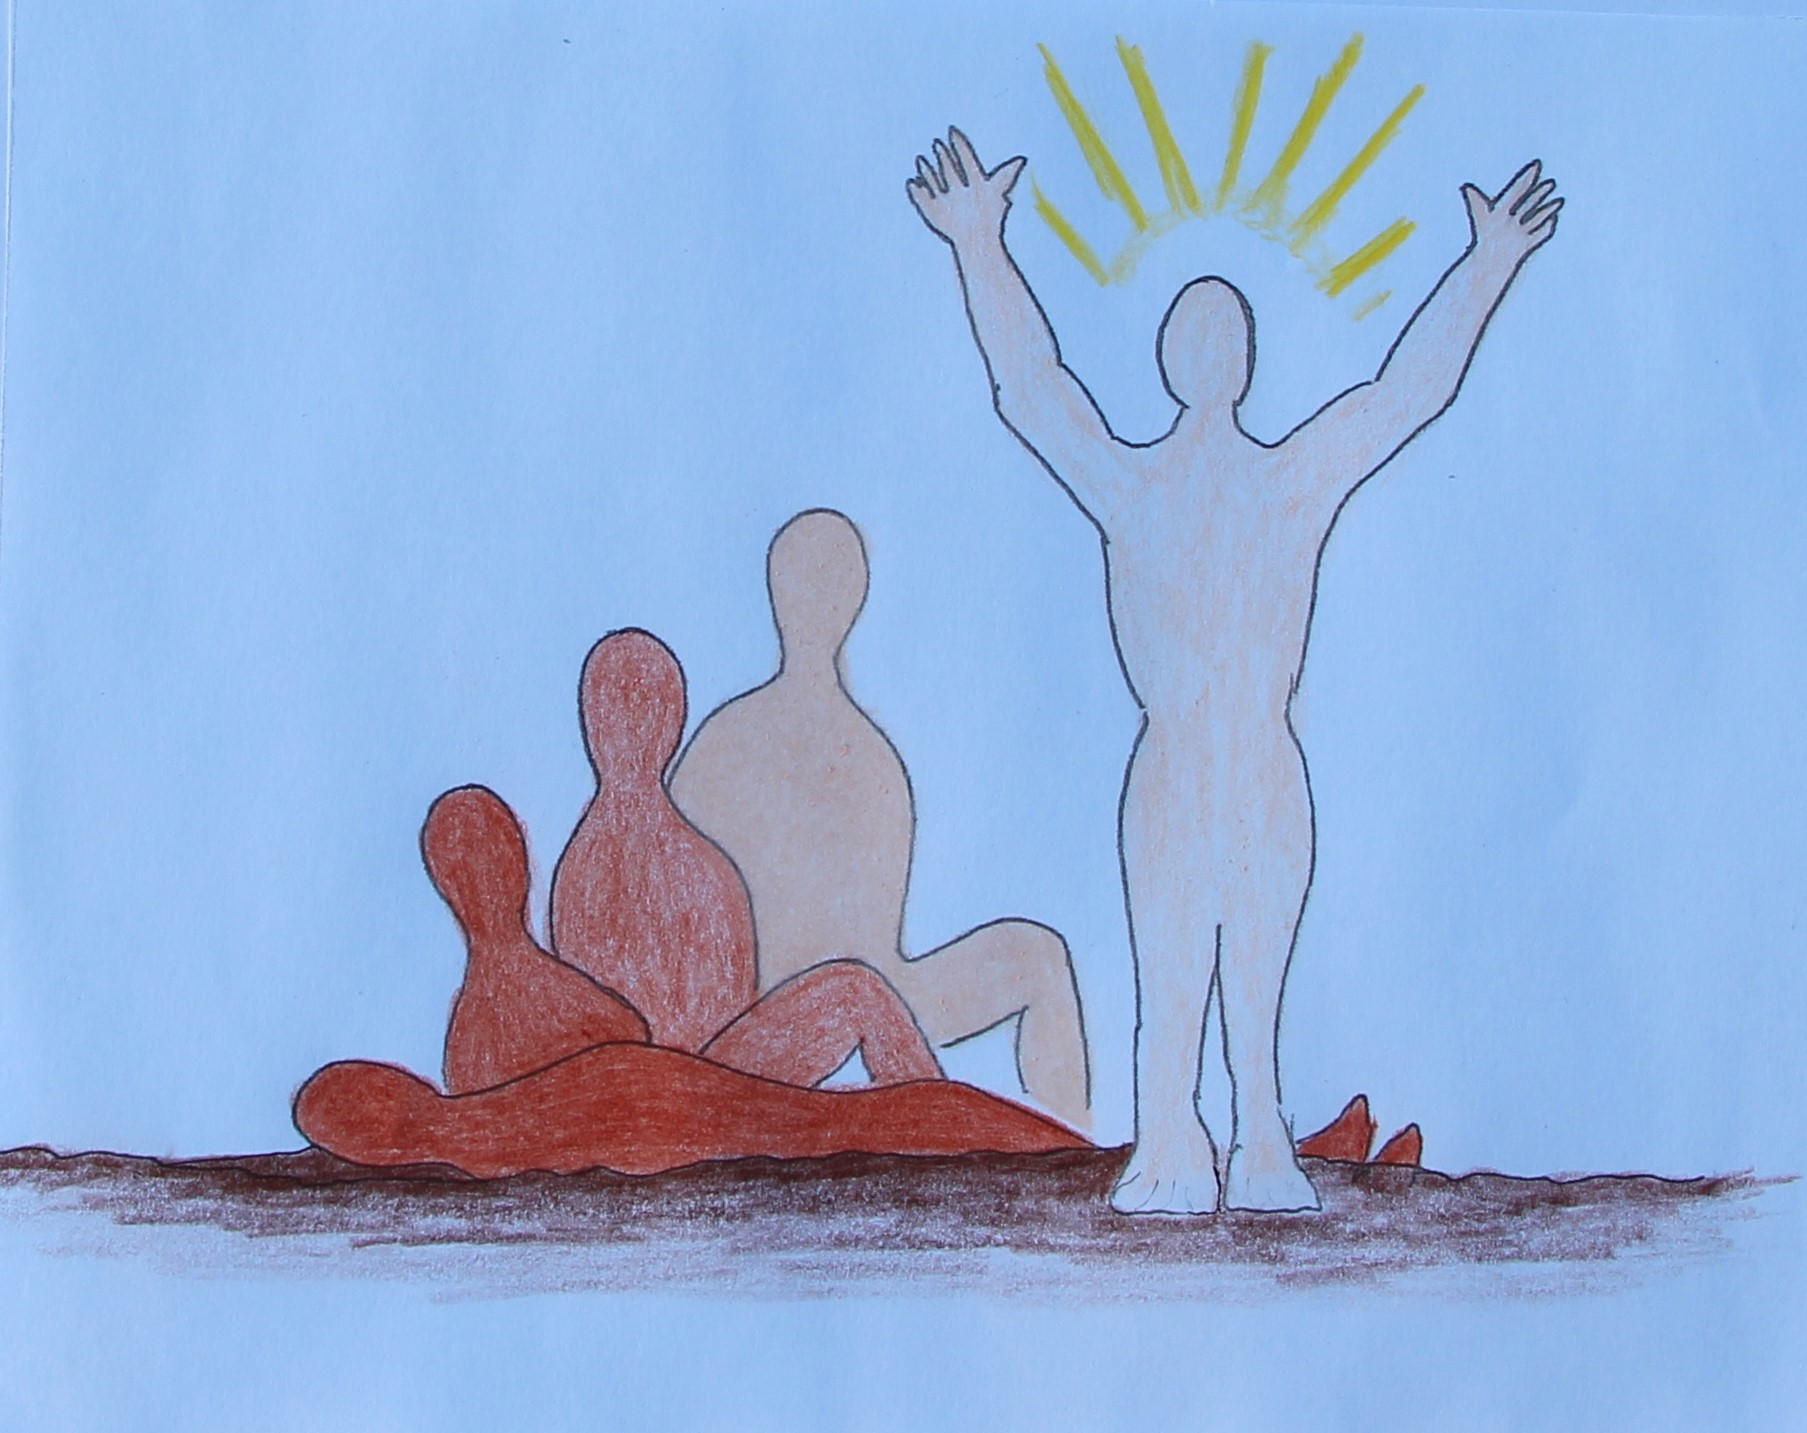 A drawing depicts four human-like figures. Three seated figures, shaded in brown tones, form a trinity on the left. One figure is standing with arms raised, facing right and outlined in white, with yellow rays around its head against a light blue background.